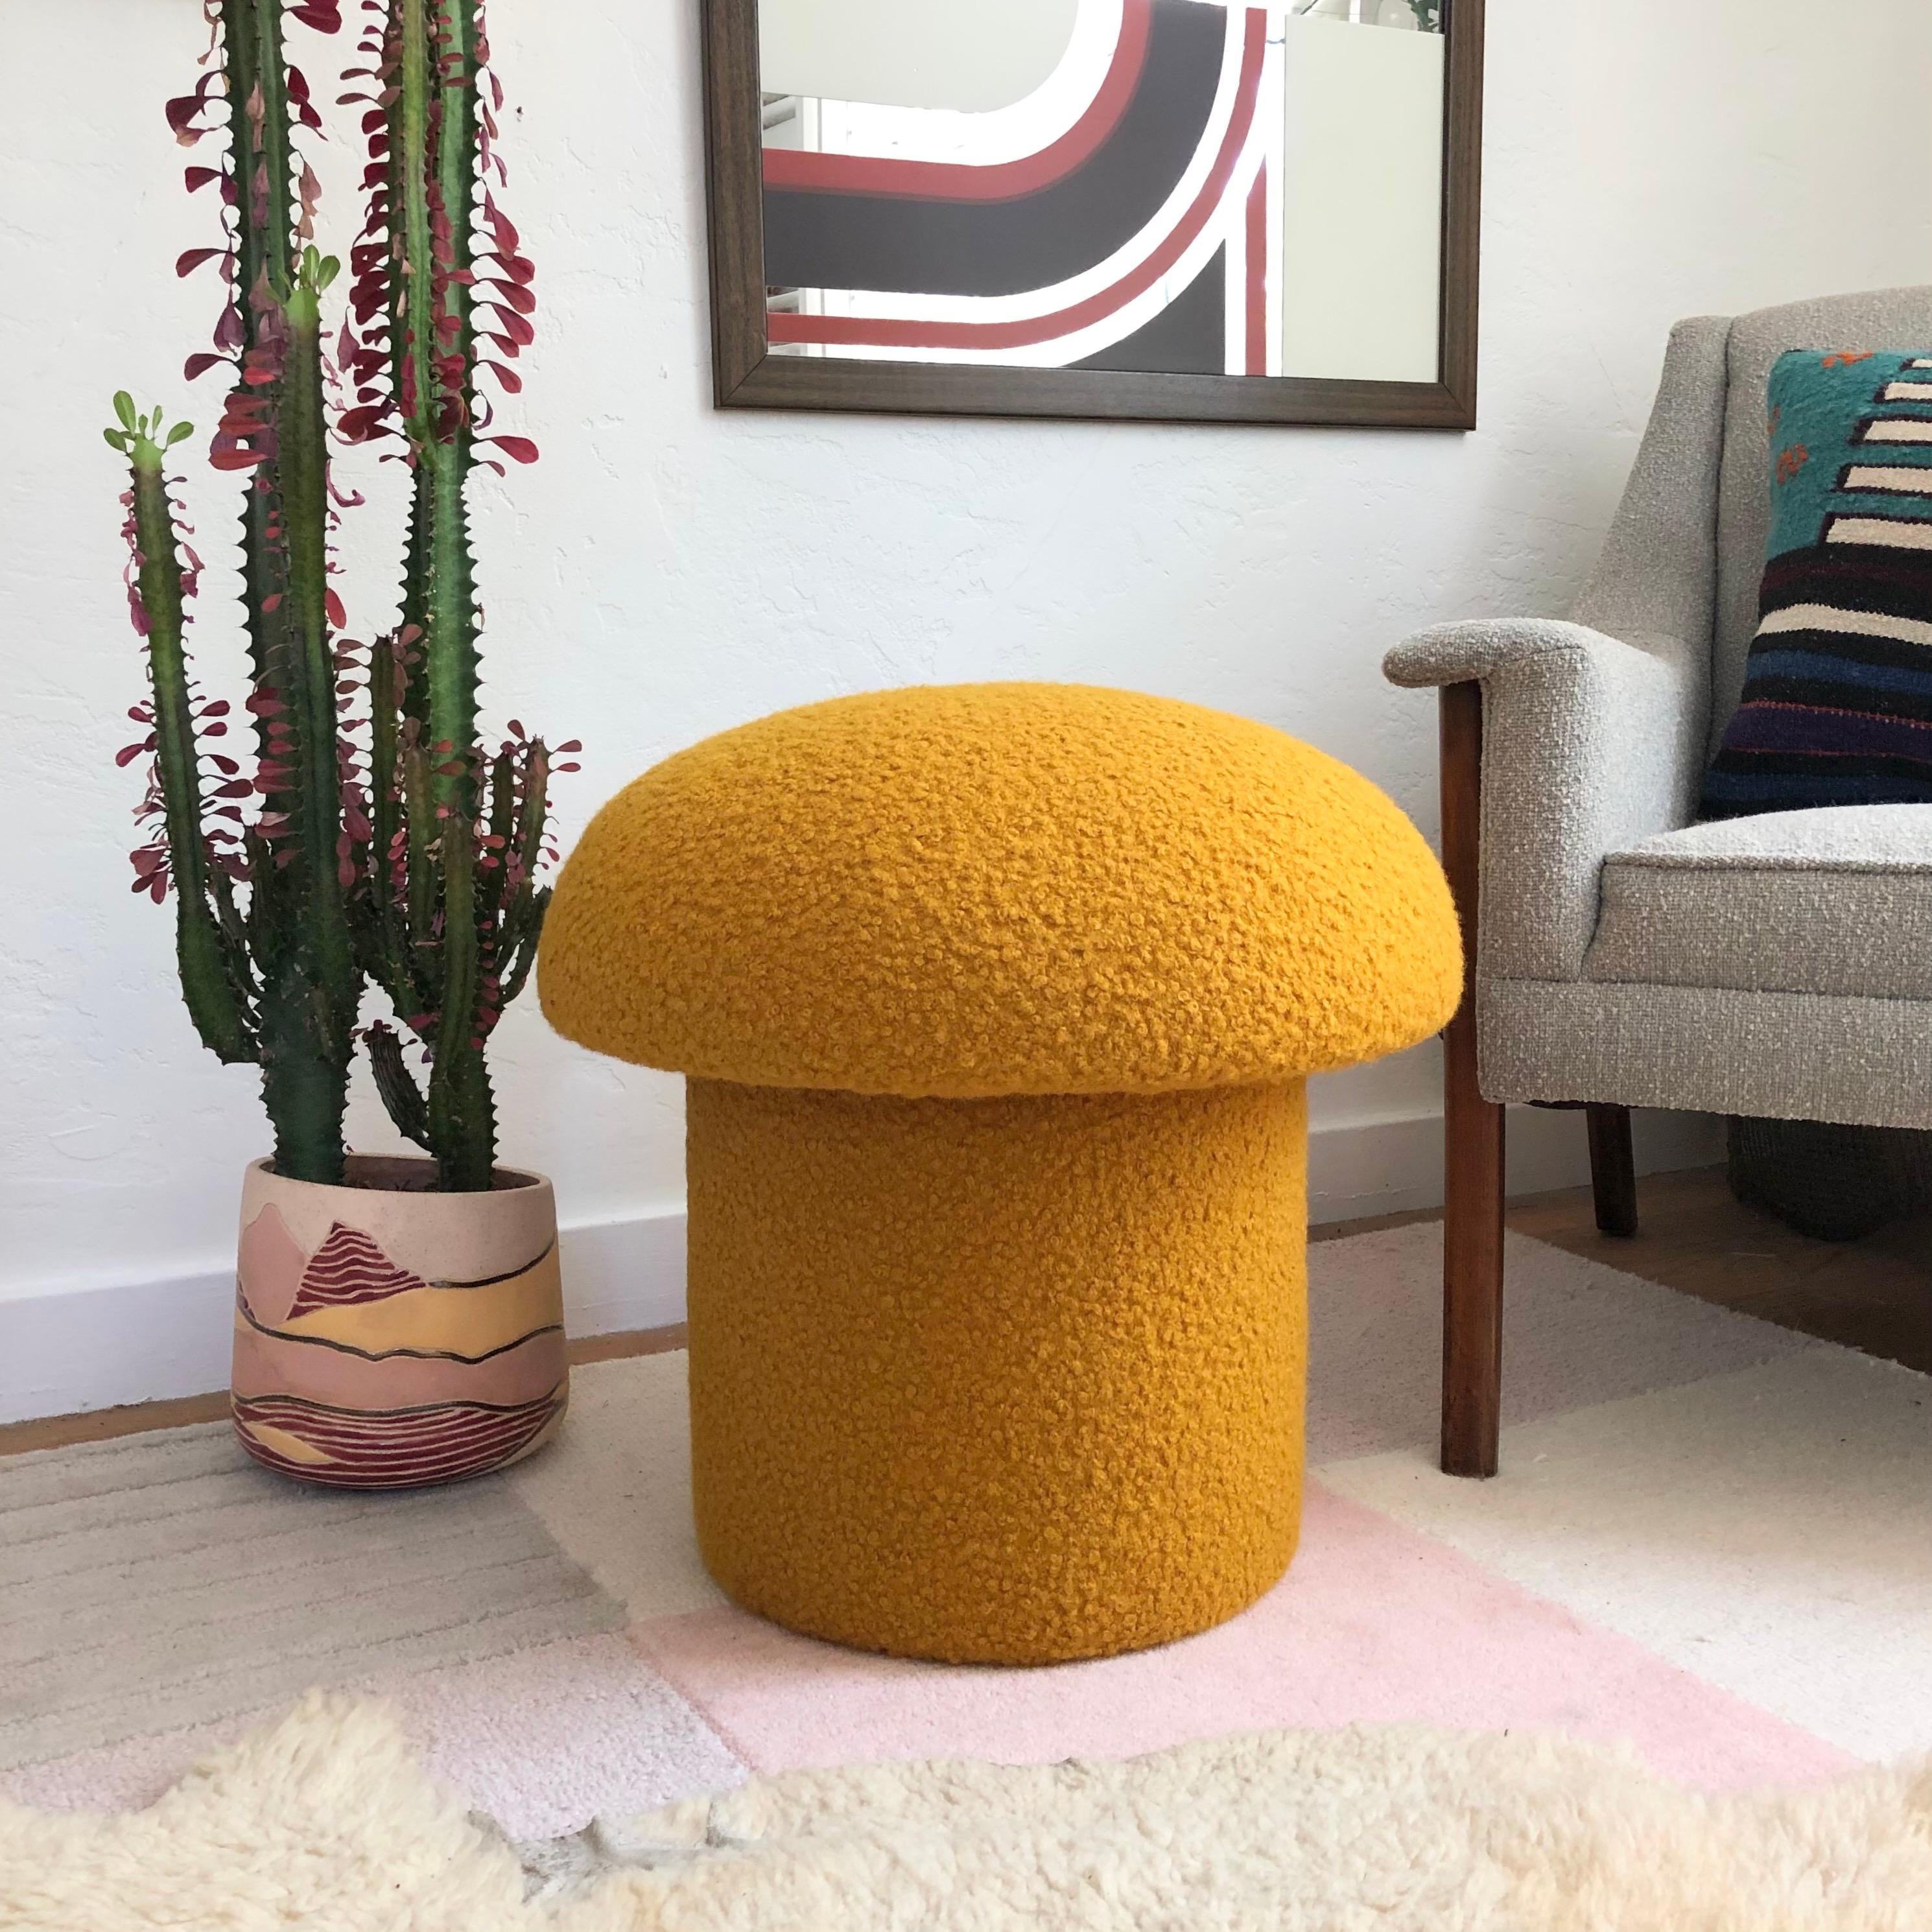 A handmade mushroom shaped ottoman, upholstered in a mustard yellow colored curly boucle fabric. Perfect for using as a footstool or extra occasional seating. A comfortable cushioned seat and sculptural accent piece.